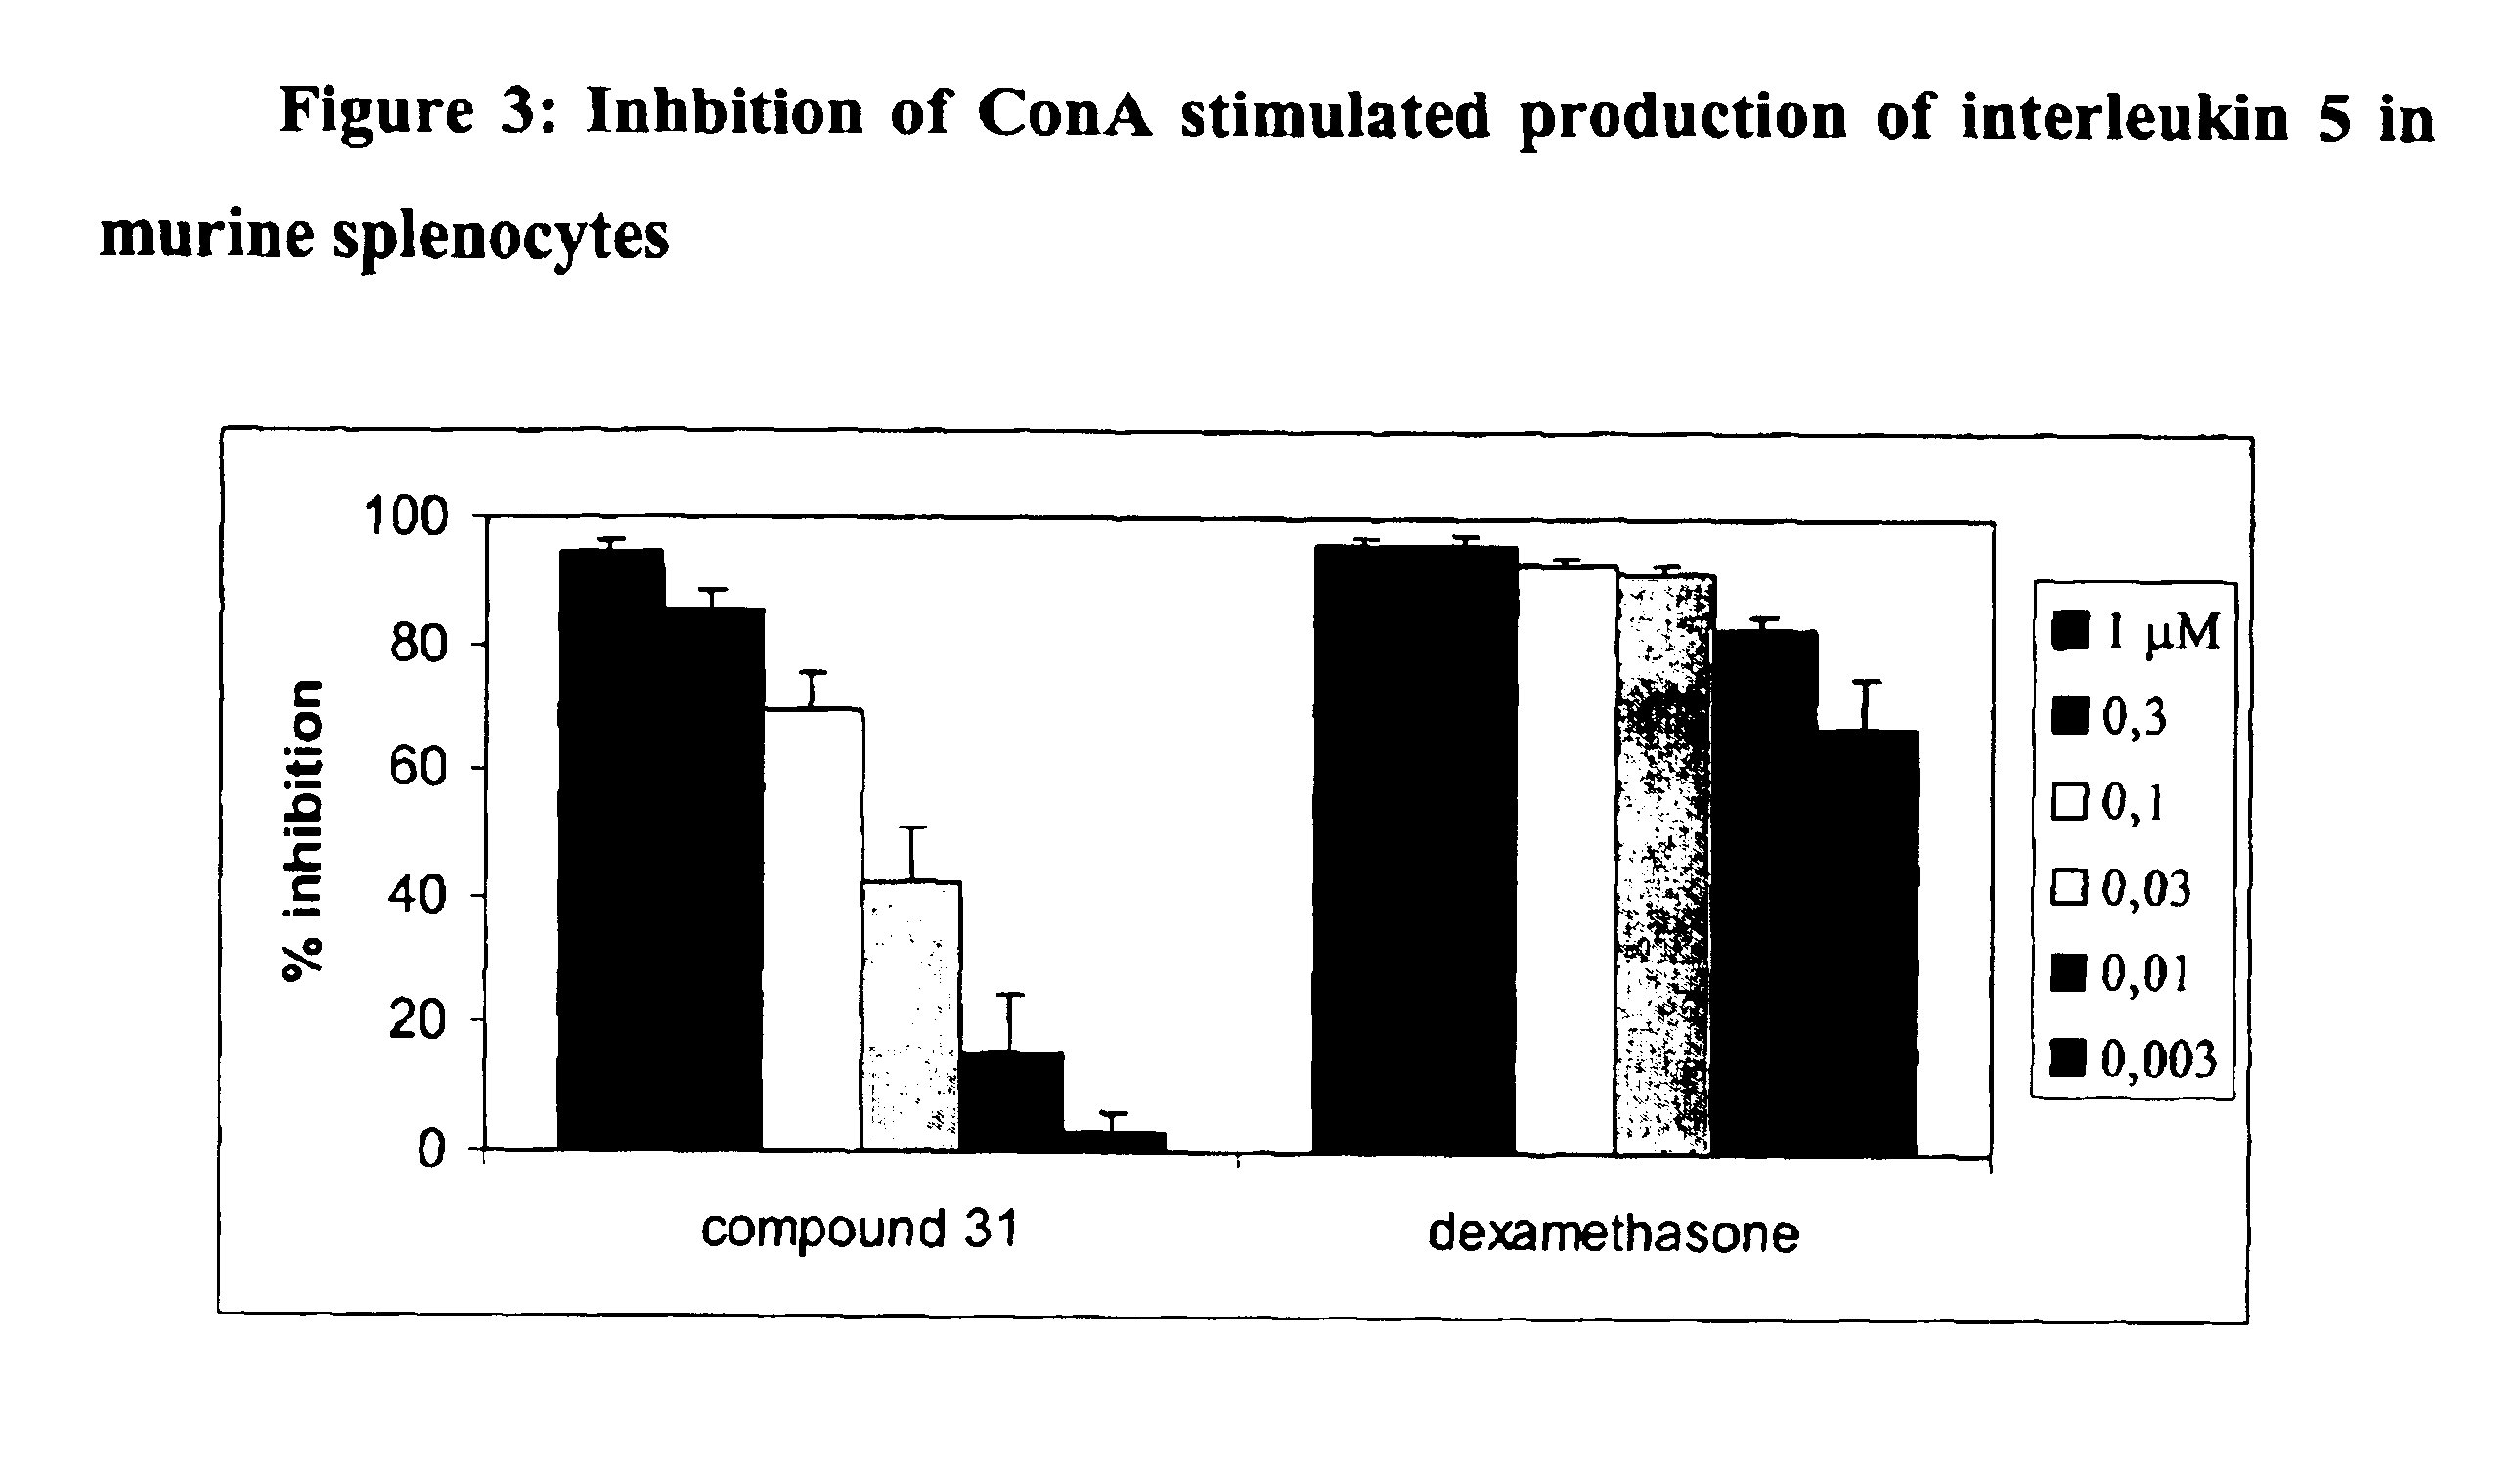 Compounds, compositions and methods for treatment of inflammatory diseases and conditions